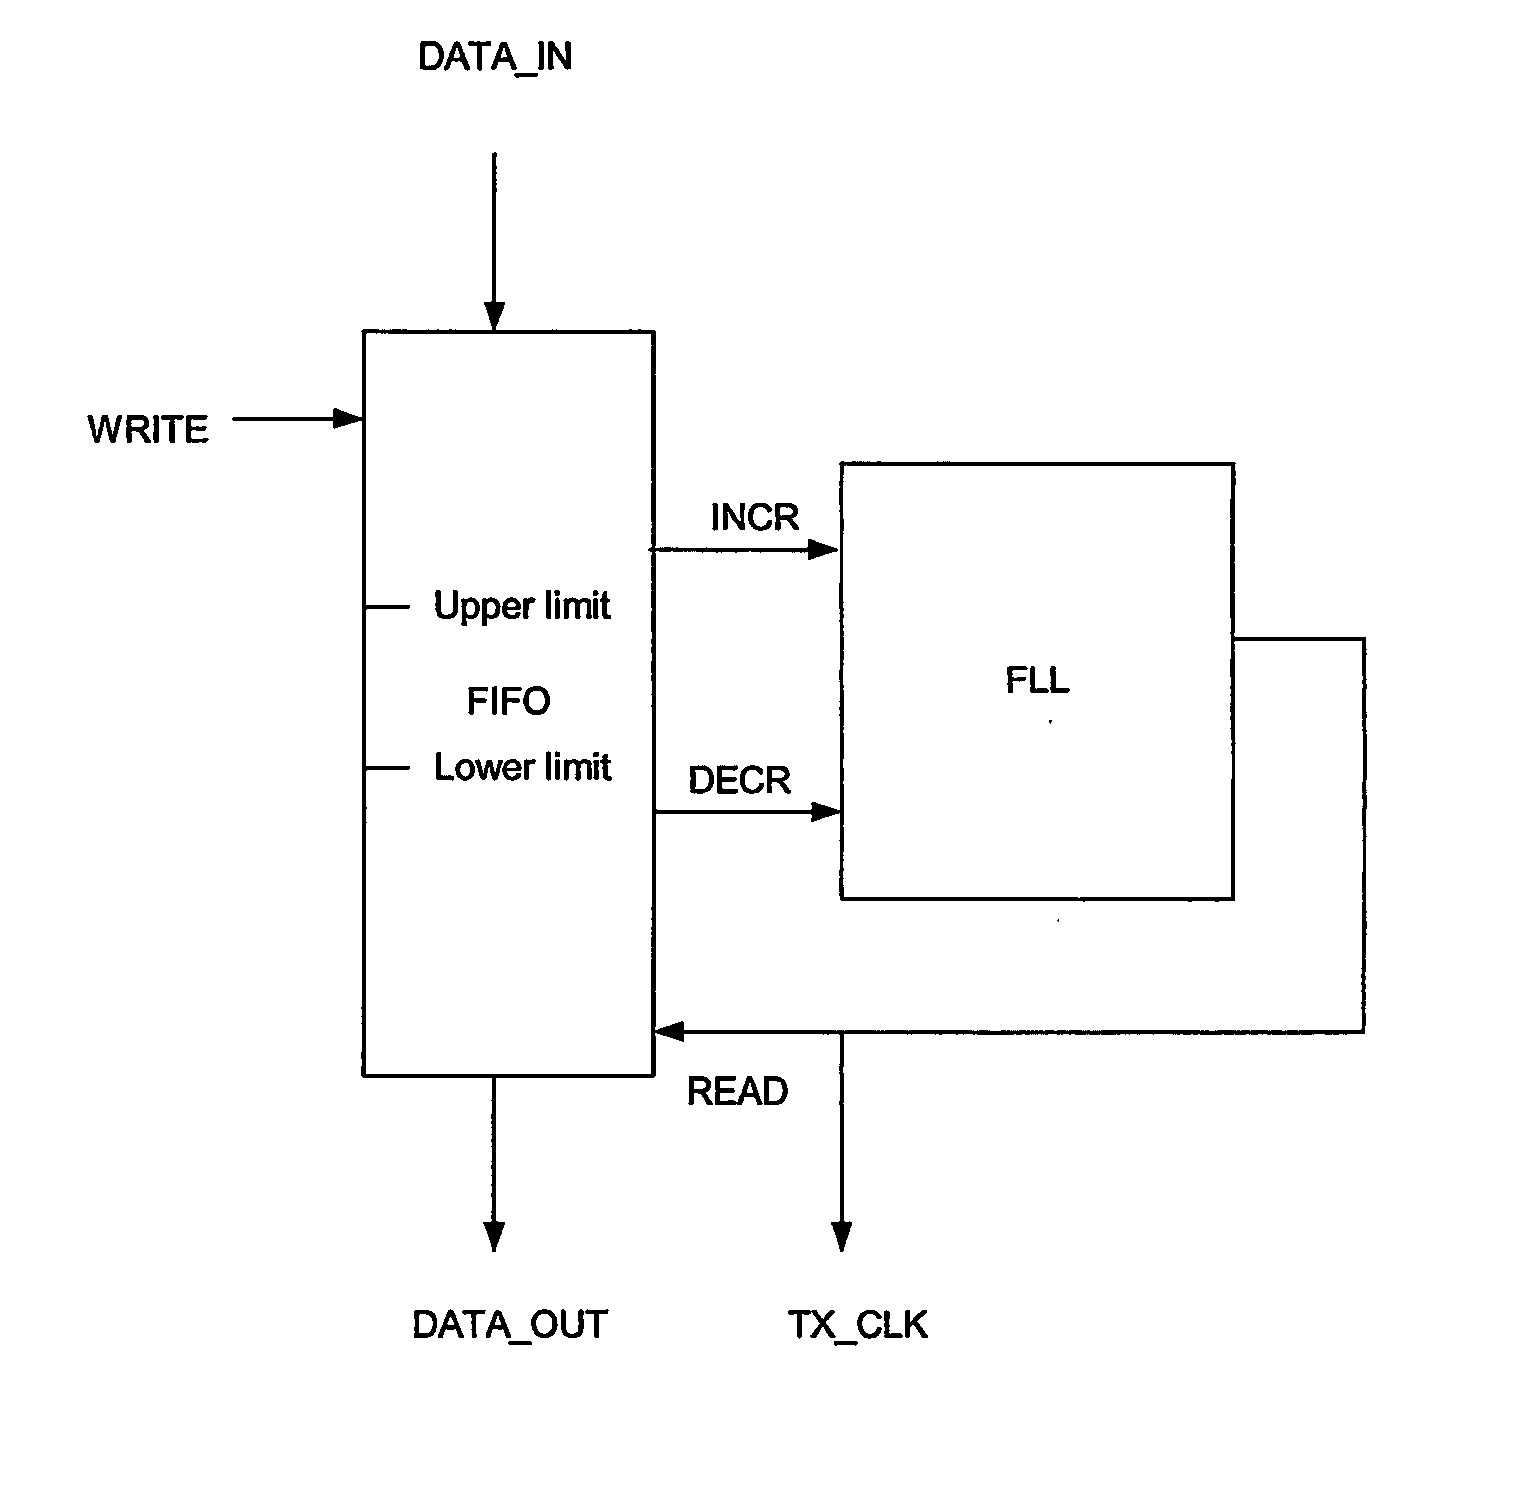 Rate adaption within a tdm switch using bit stuffing